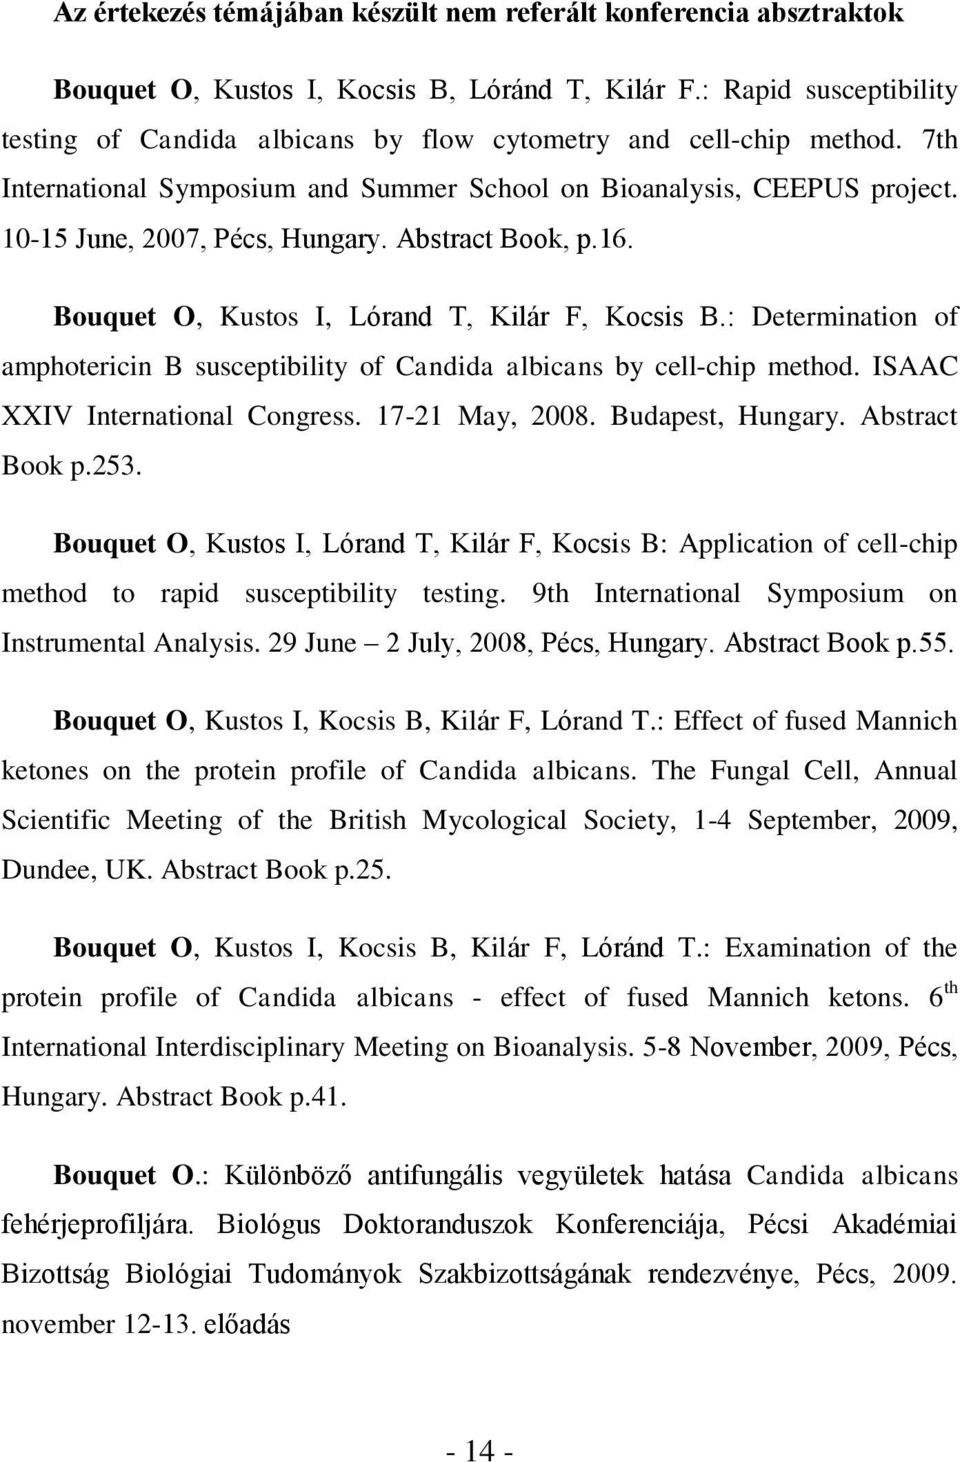 10-15 June, 2007, Pécs, Hungary. Abstract Book, p.16. Bouquet O, Kustos I, Lórand T, Kilár F, Kocsis B.: Determination of amphotericin B susceptibility of Candida albicans by cell-chip method.